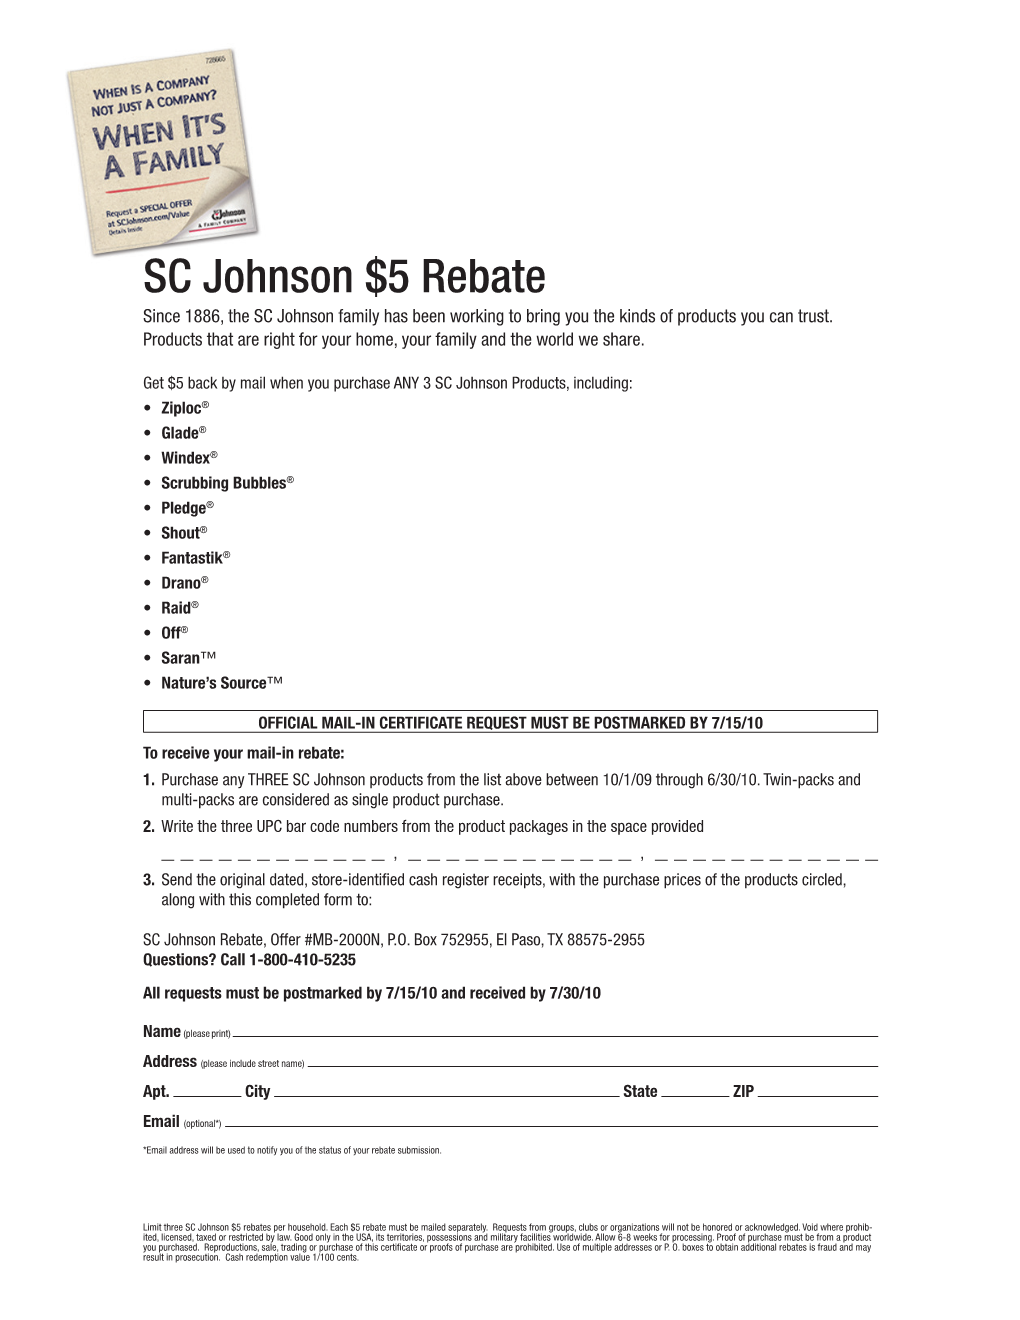 SC Johnson $5 Rebate Since 1886, the SC Johnson Family Has Been Working to Bring You the Kinds of Products You Can Trust